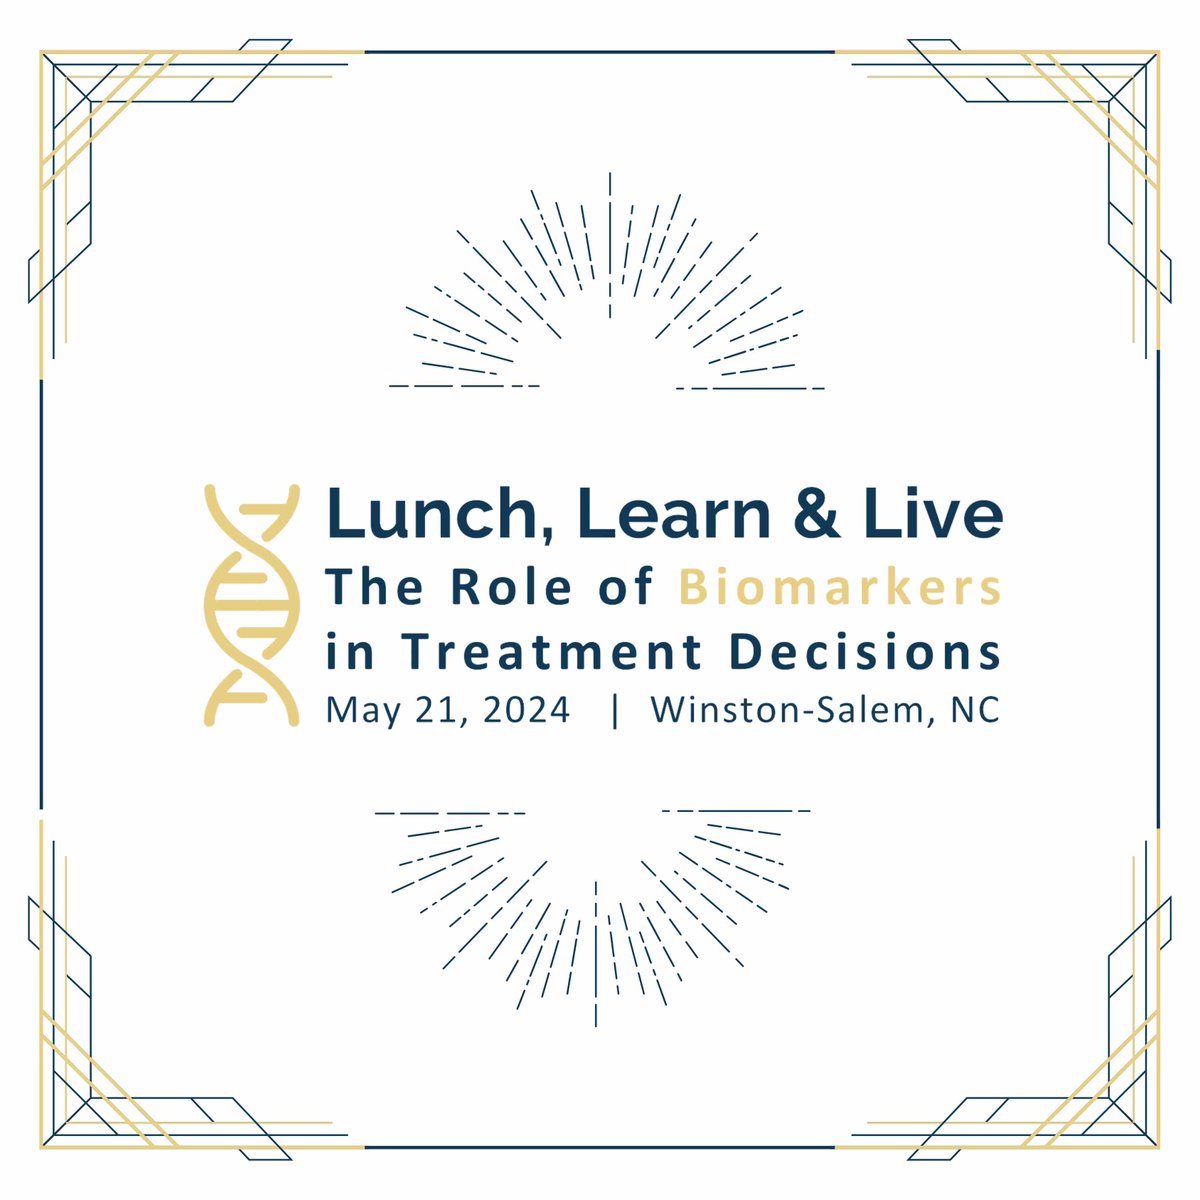 You are invited on 5/21 at 11:30 am at Graylyn Estate and Conference Center – 1900 Reynolda Road The Mews – Winston-Salem, NC to learn how knowing genomic insights into your cancer to help your doctor guide a personalized care plan. Registration is free: form.jotform.com/240774362780158